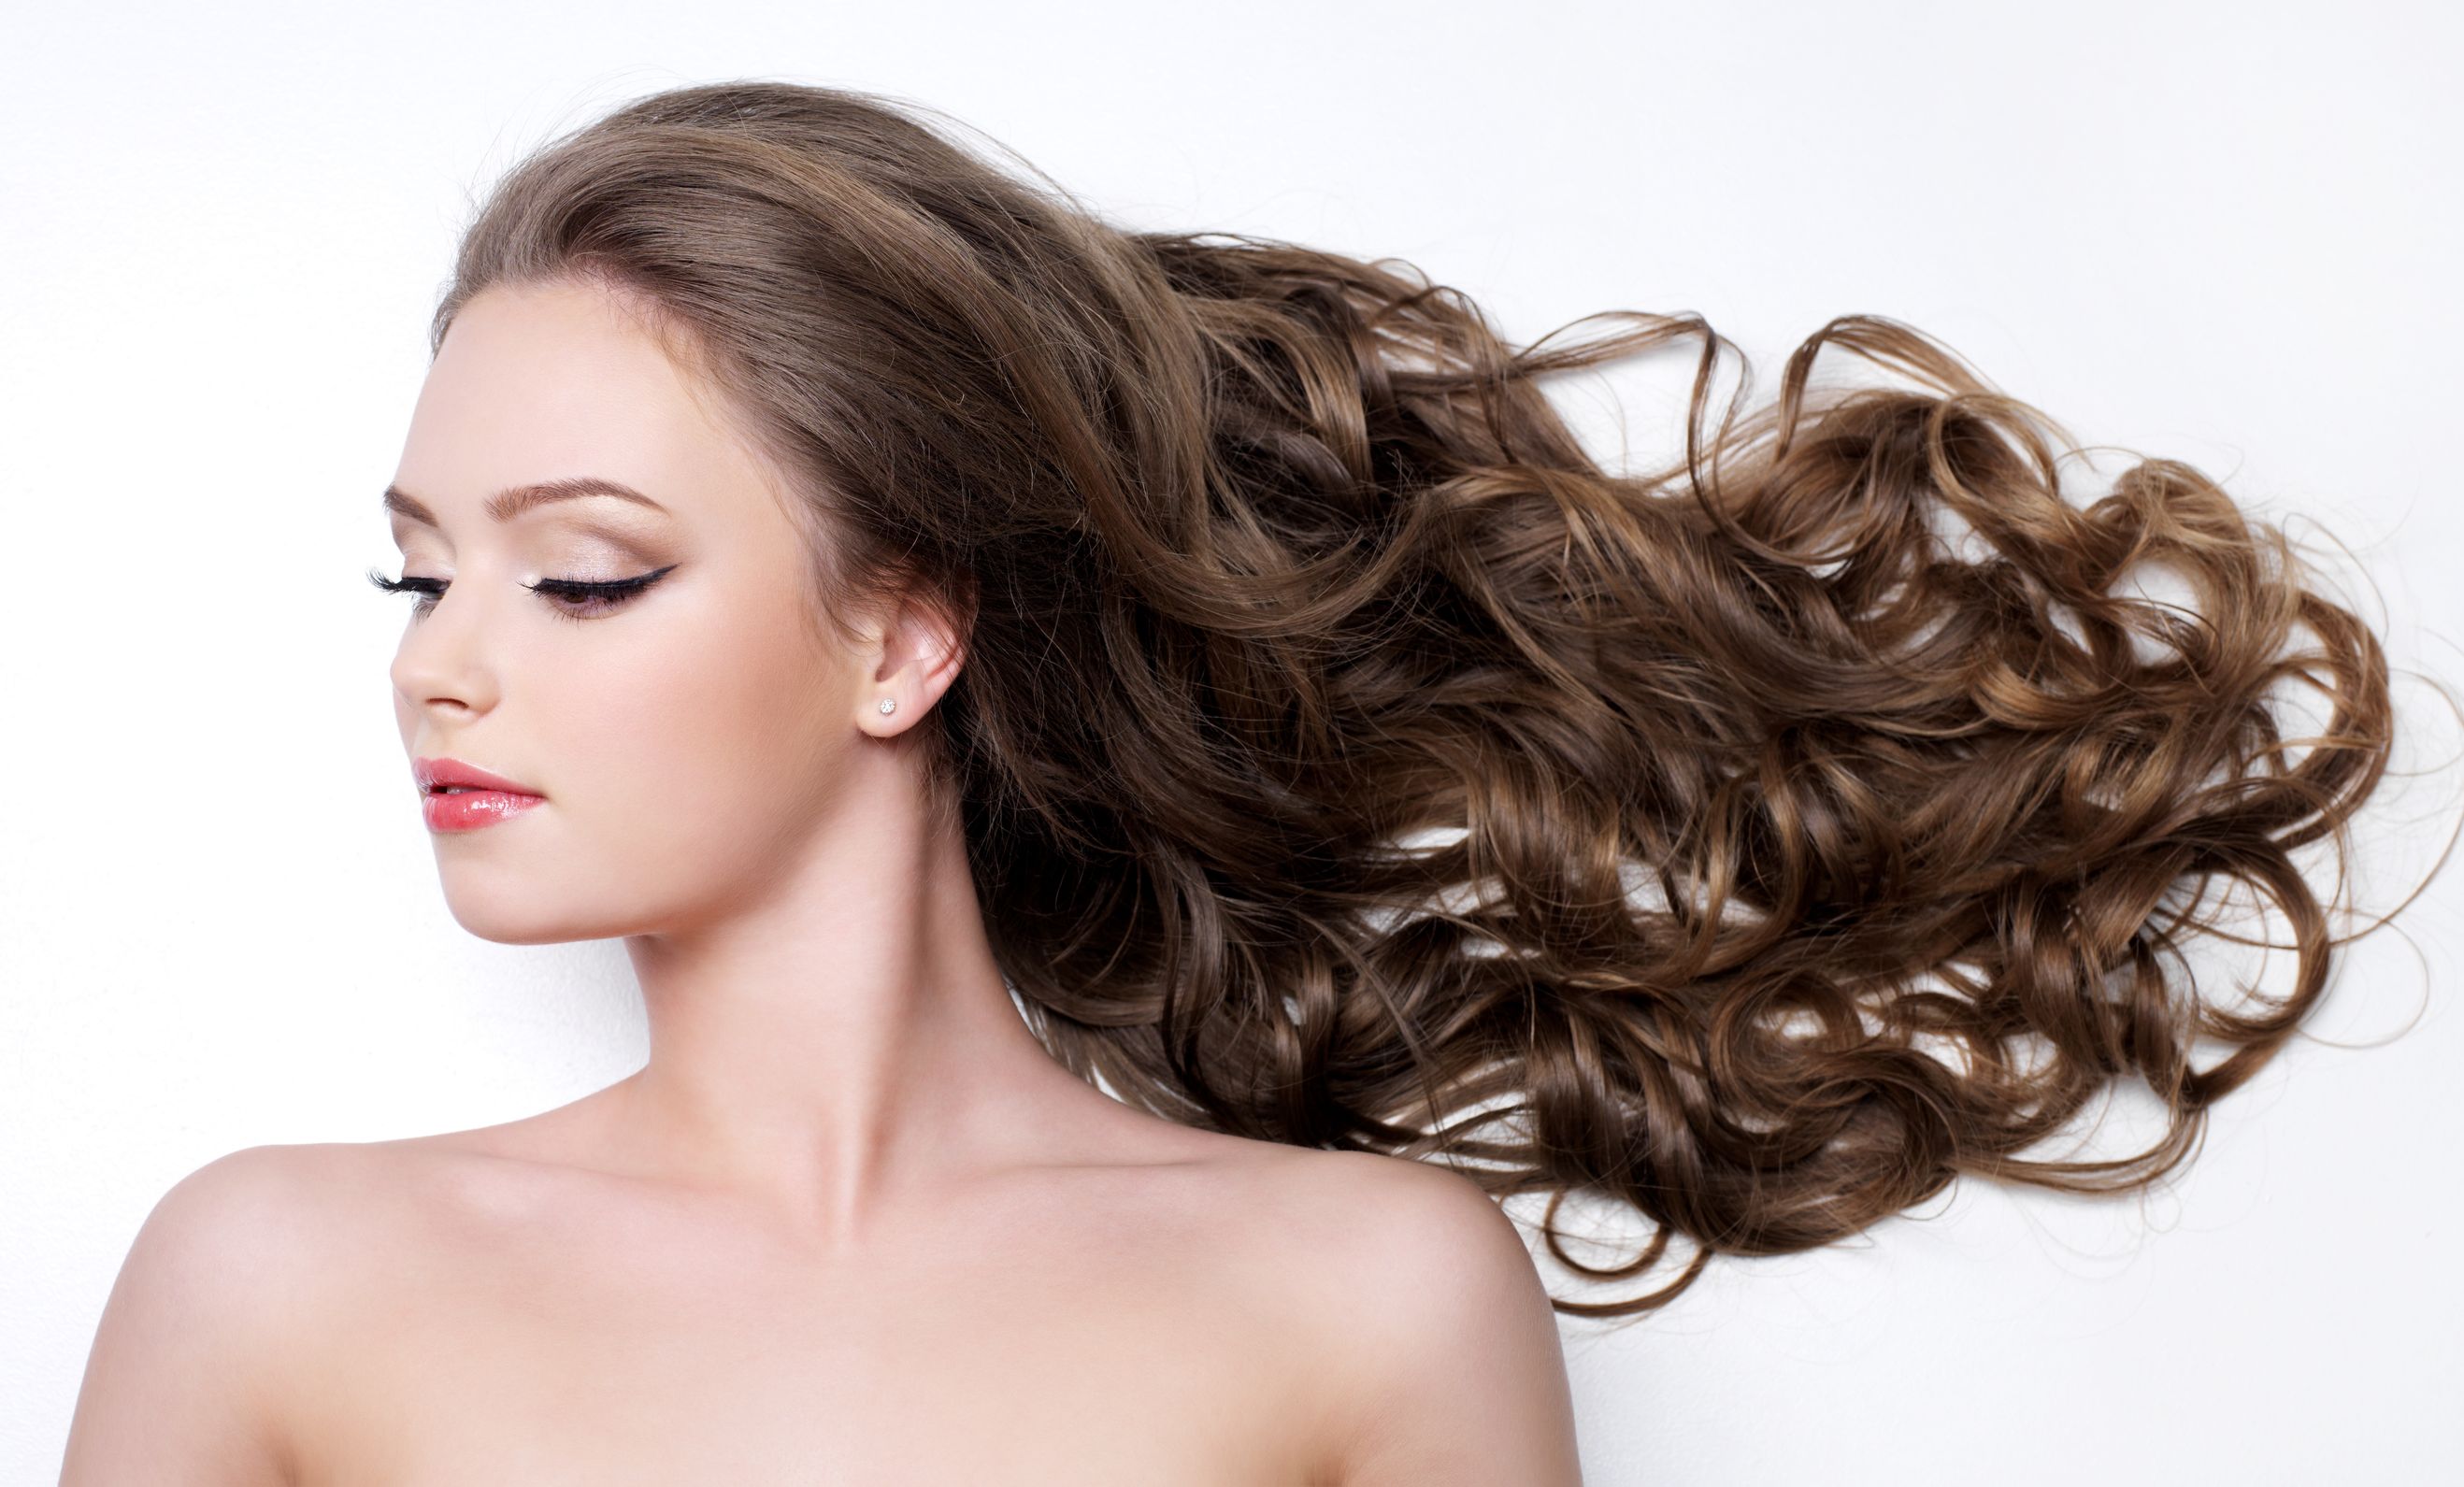 How To Manage Dandruff In Hair